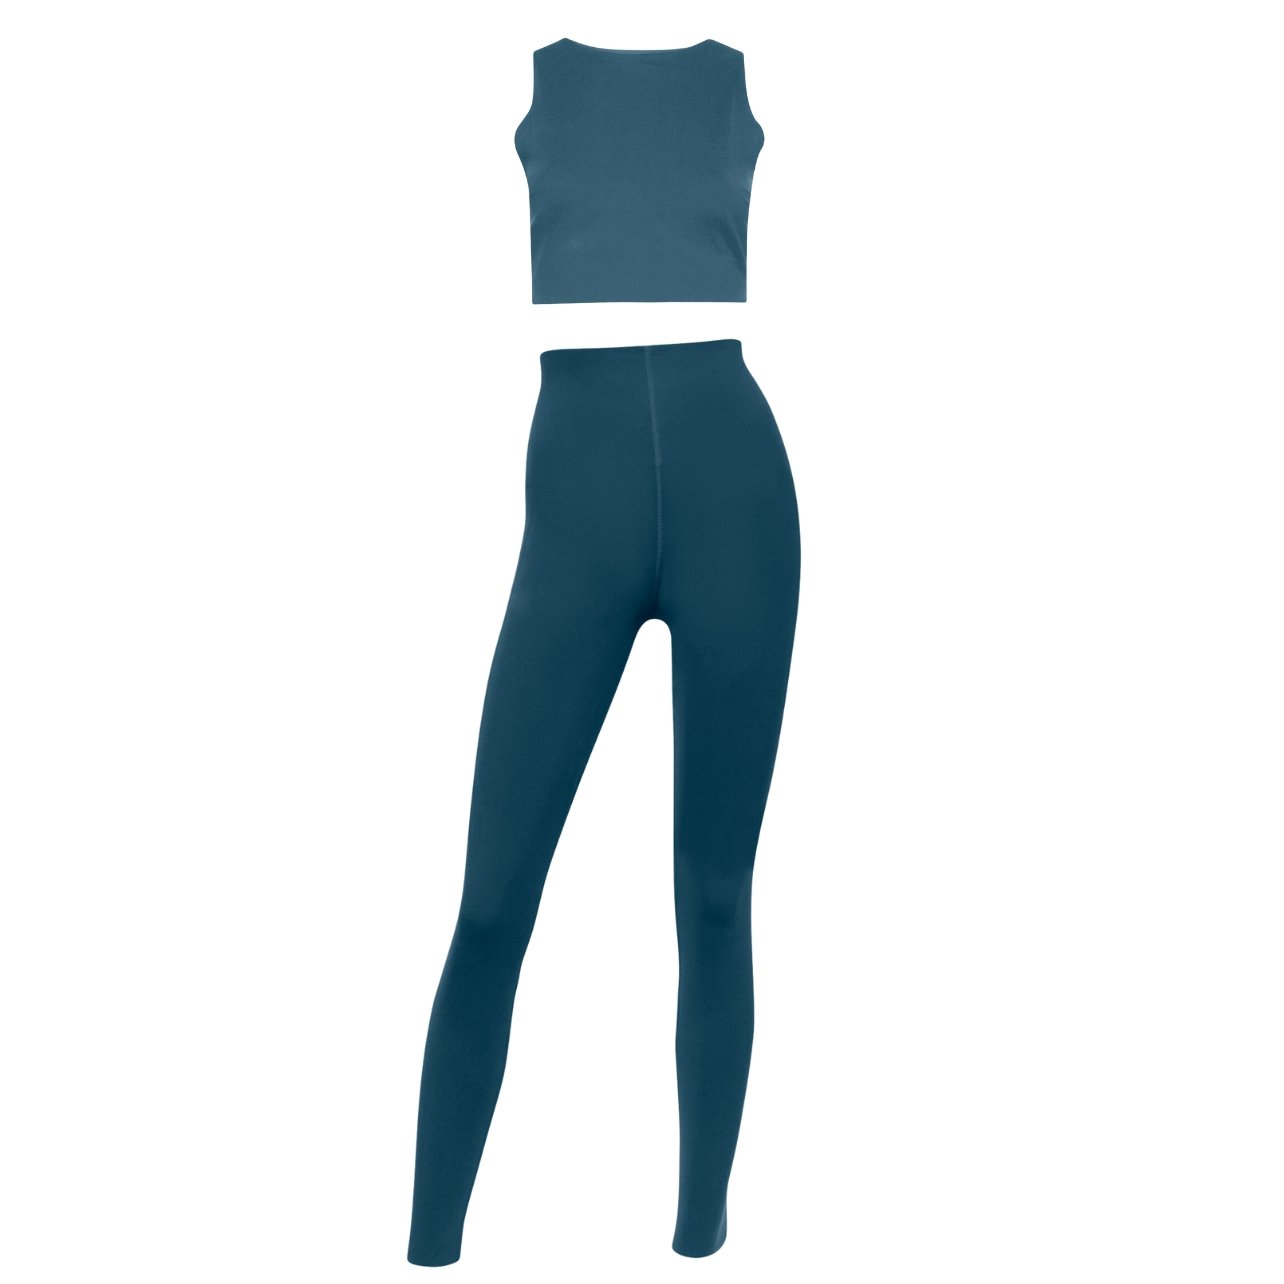 Wolford blue sleeveless crop top and leggings set made from bonded fabric